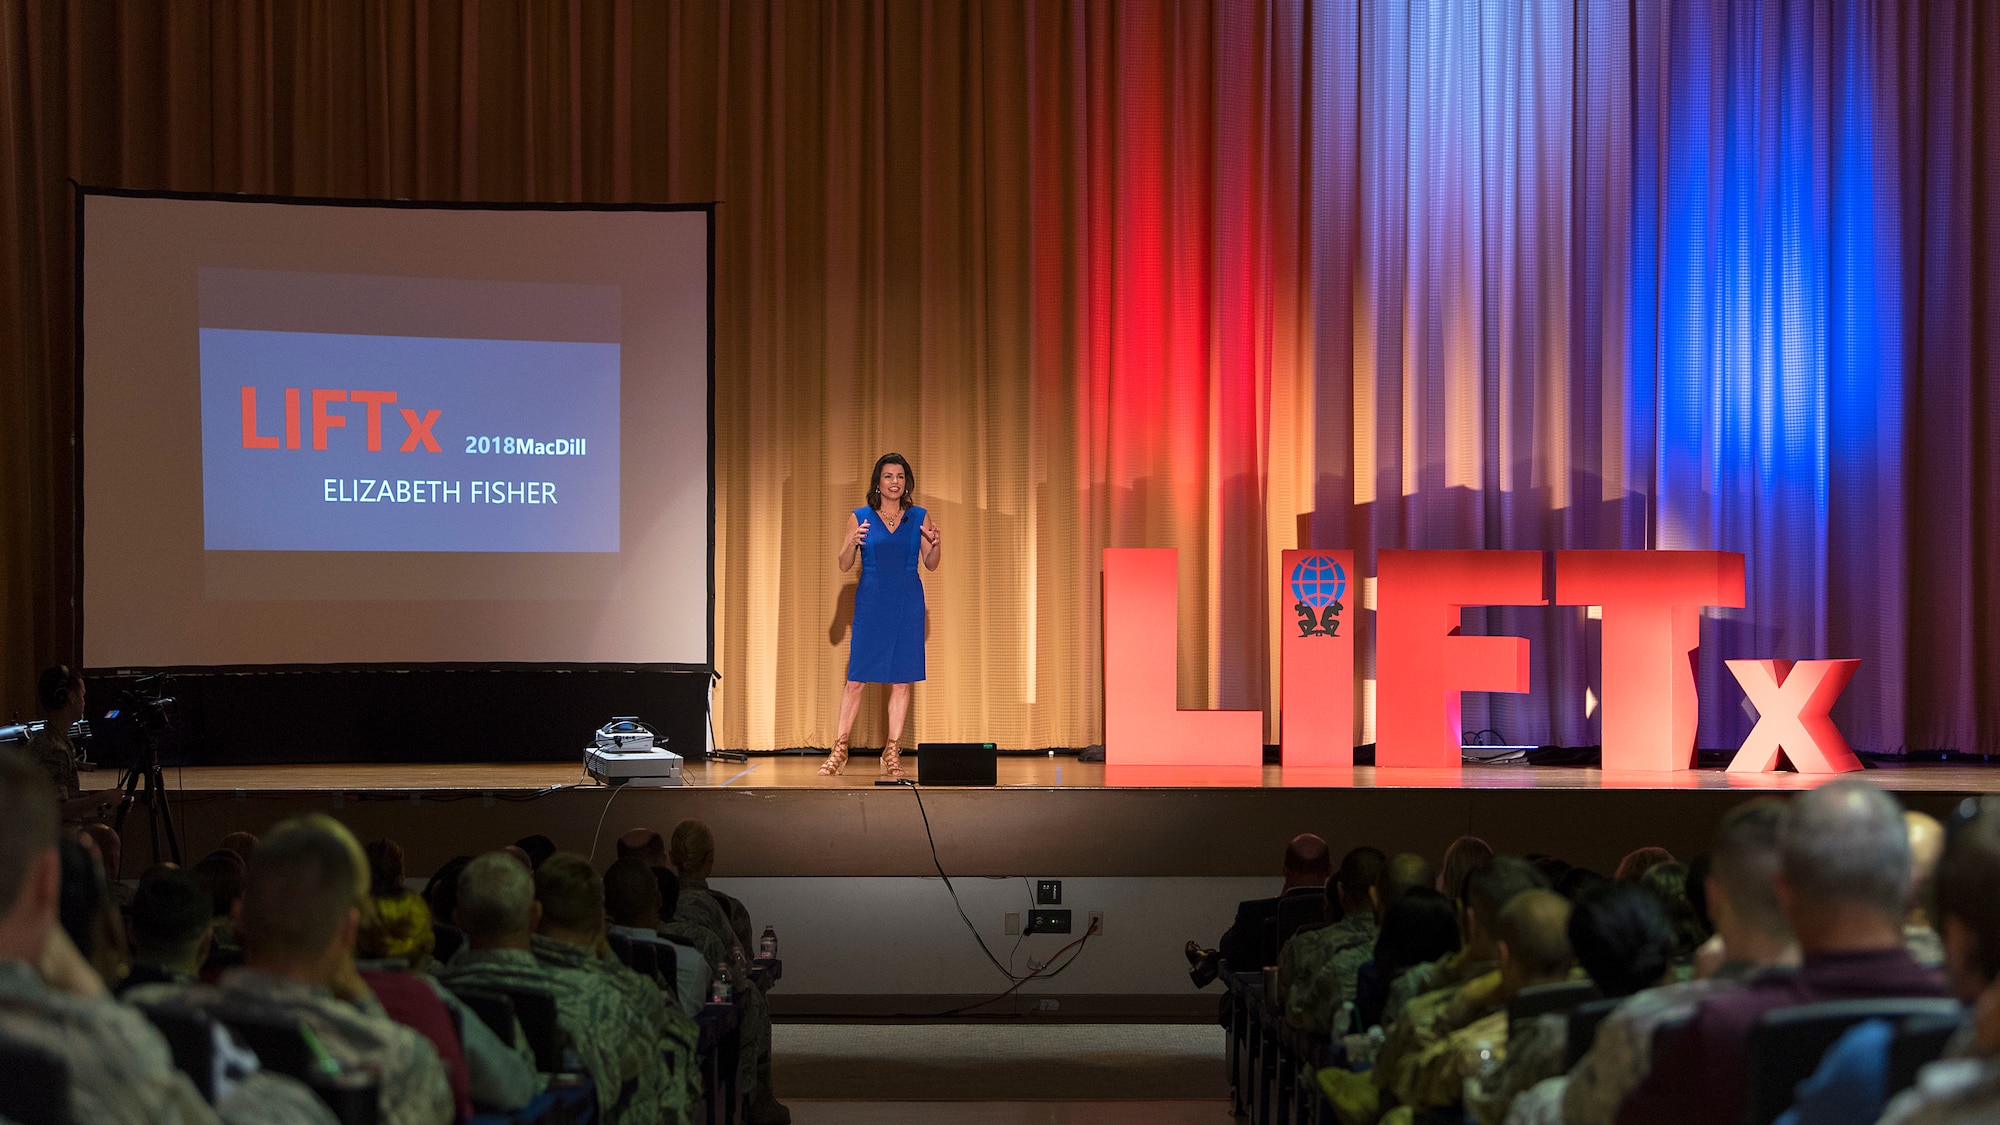 Elizabeth Fisher, the co-founder and president of Selah Freedom, speaks during the Leaders Inspiring for Tomorrow (LIFTx) seminar hosted by MacDill Air Force Base, Fla., April 19, 2018. Fisher spoke on different principles of leadership and how they can be applied to create welcoming work environments. LIFTx brought together 10 diverse speakers from around the country who shared their stories of leadership, inspiration, innovation and resiliency.